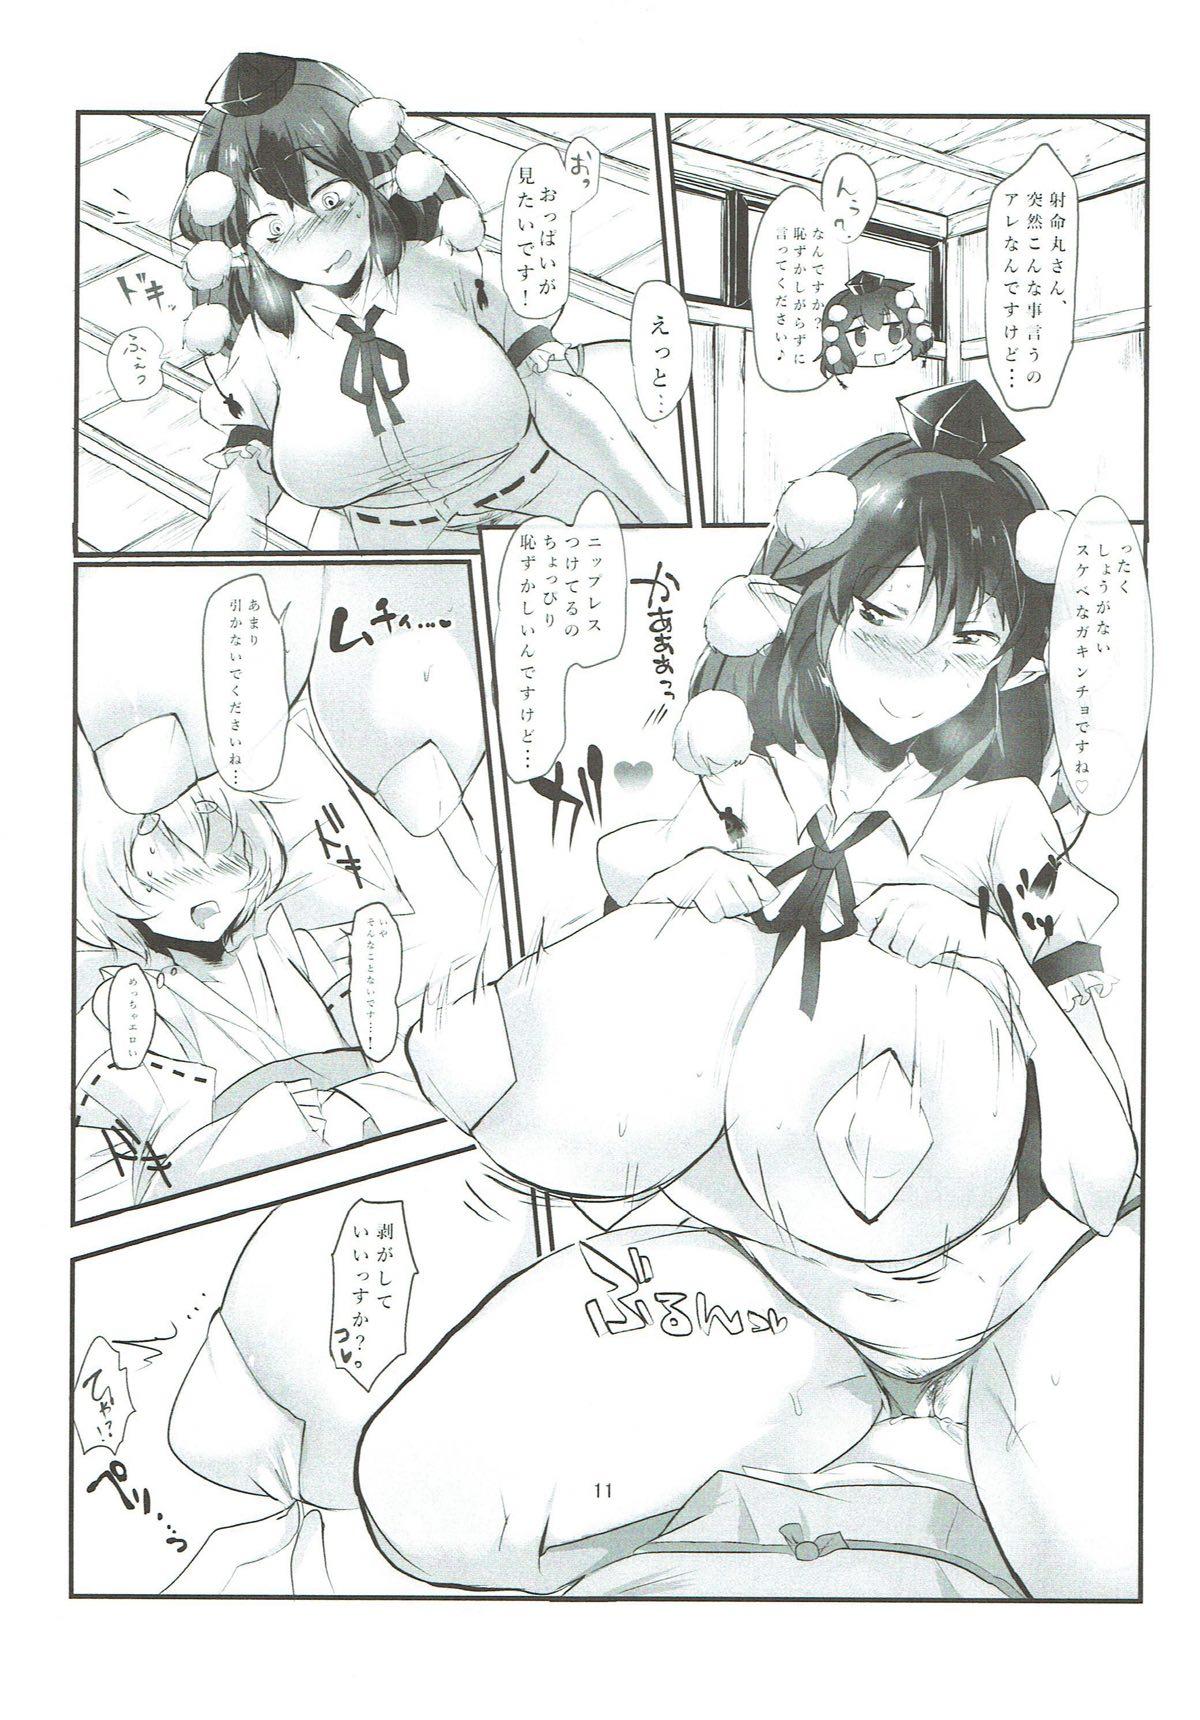 Perfect Body Porn あやもみ サンドオーガズム 東方Project - Touhou project Machine - Page 12